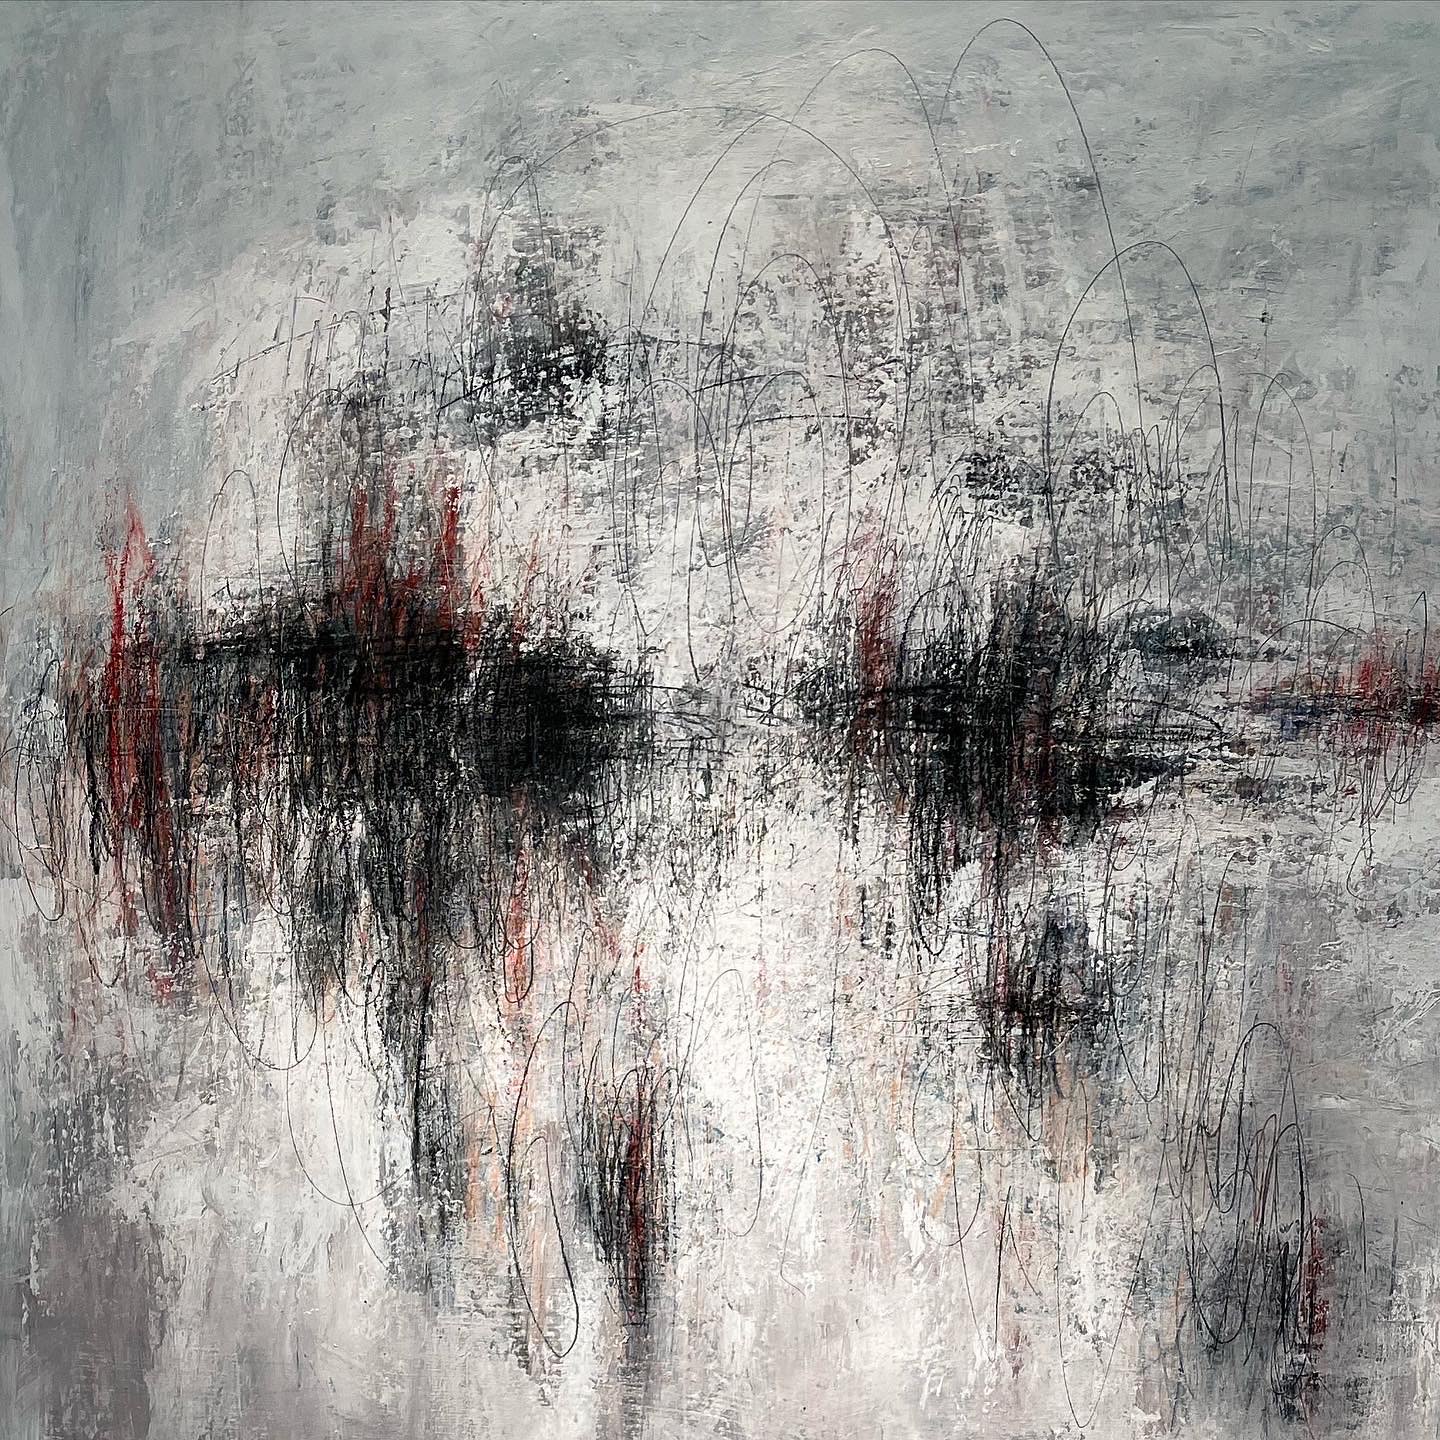 CODA (Detail), Mixed Media on Panel, 36 inches x 36 inches